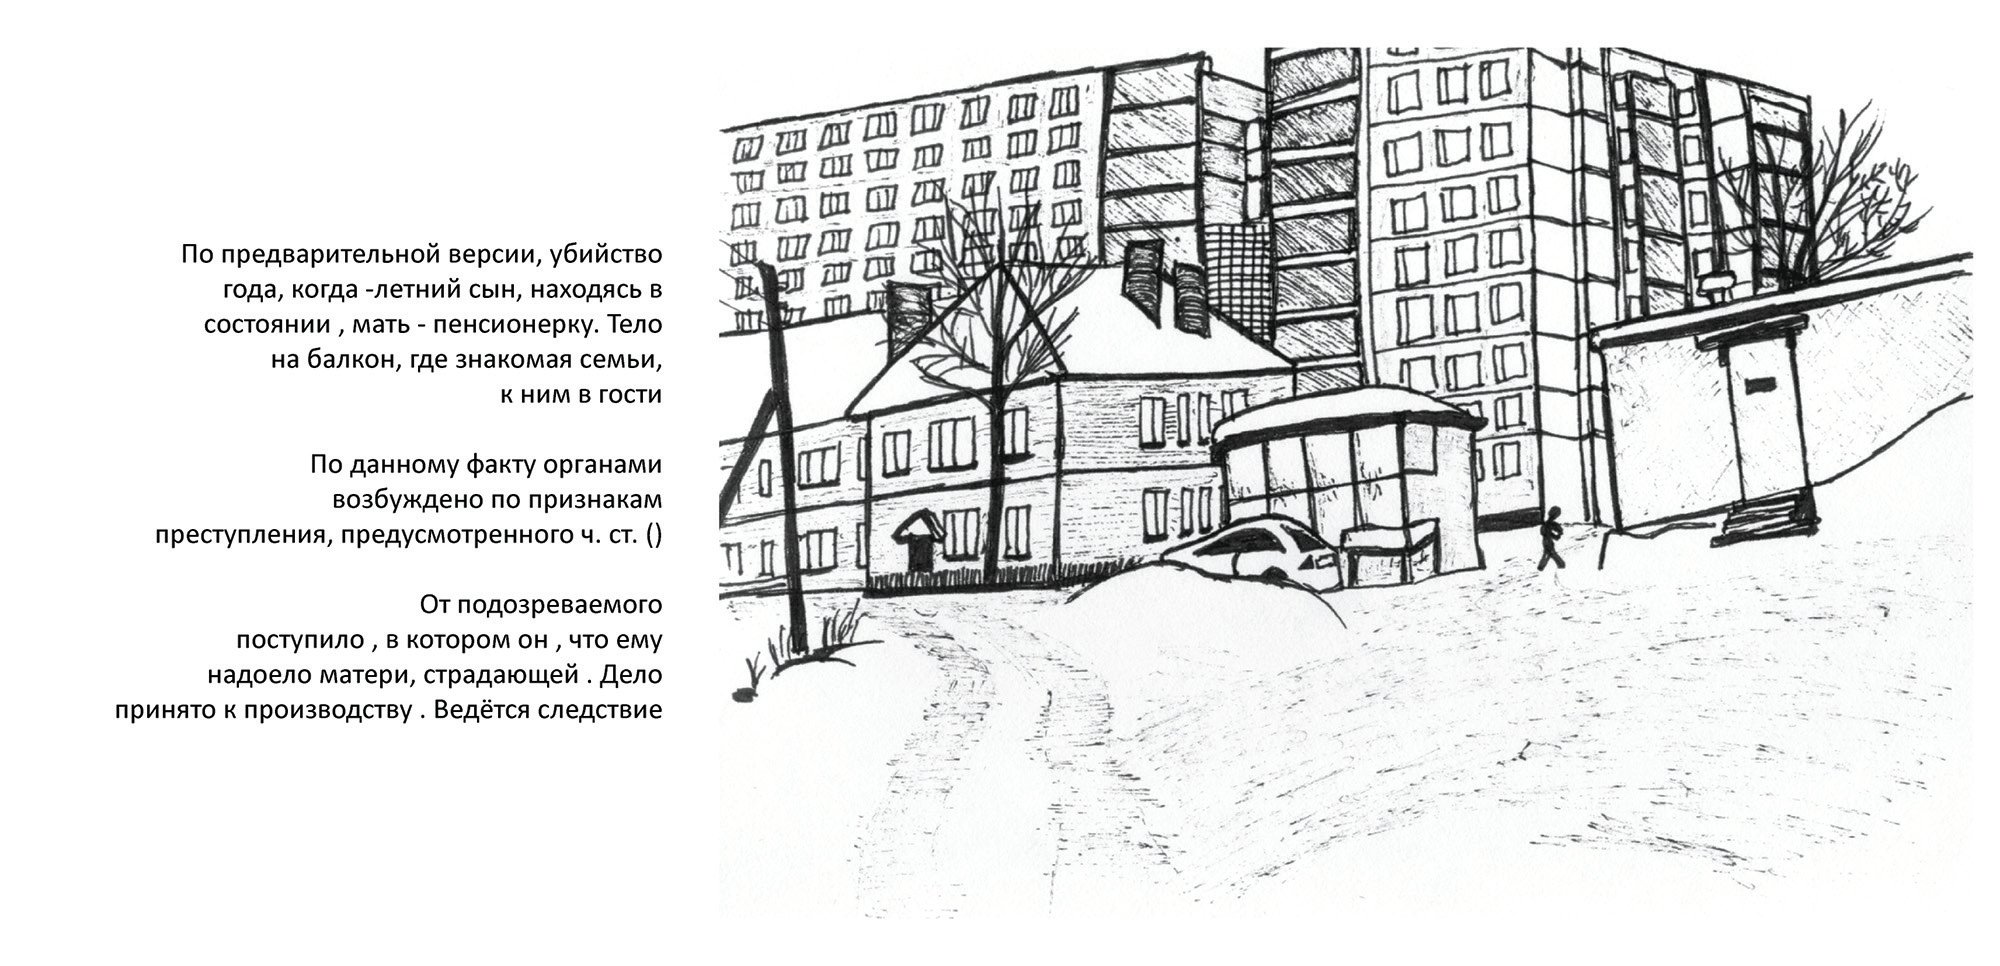 From Wadded White, 2014. The text is made of distilled clichéd language of Arkhangelsk crime news